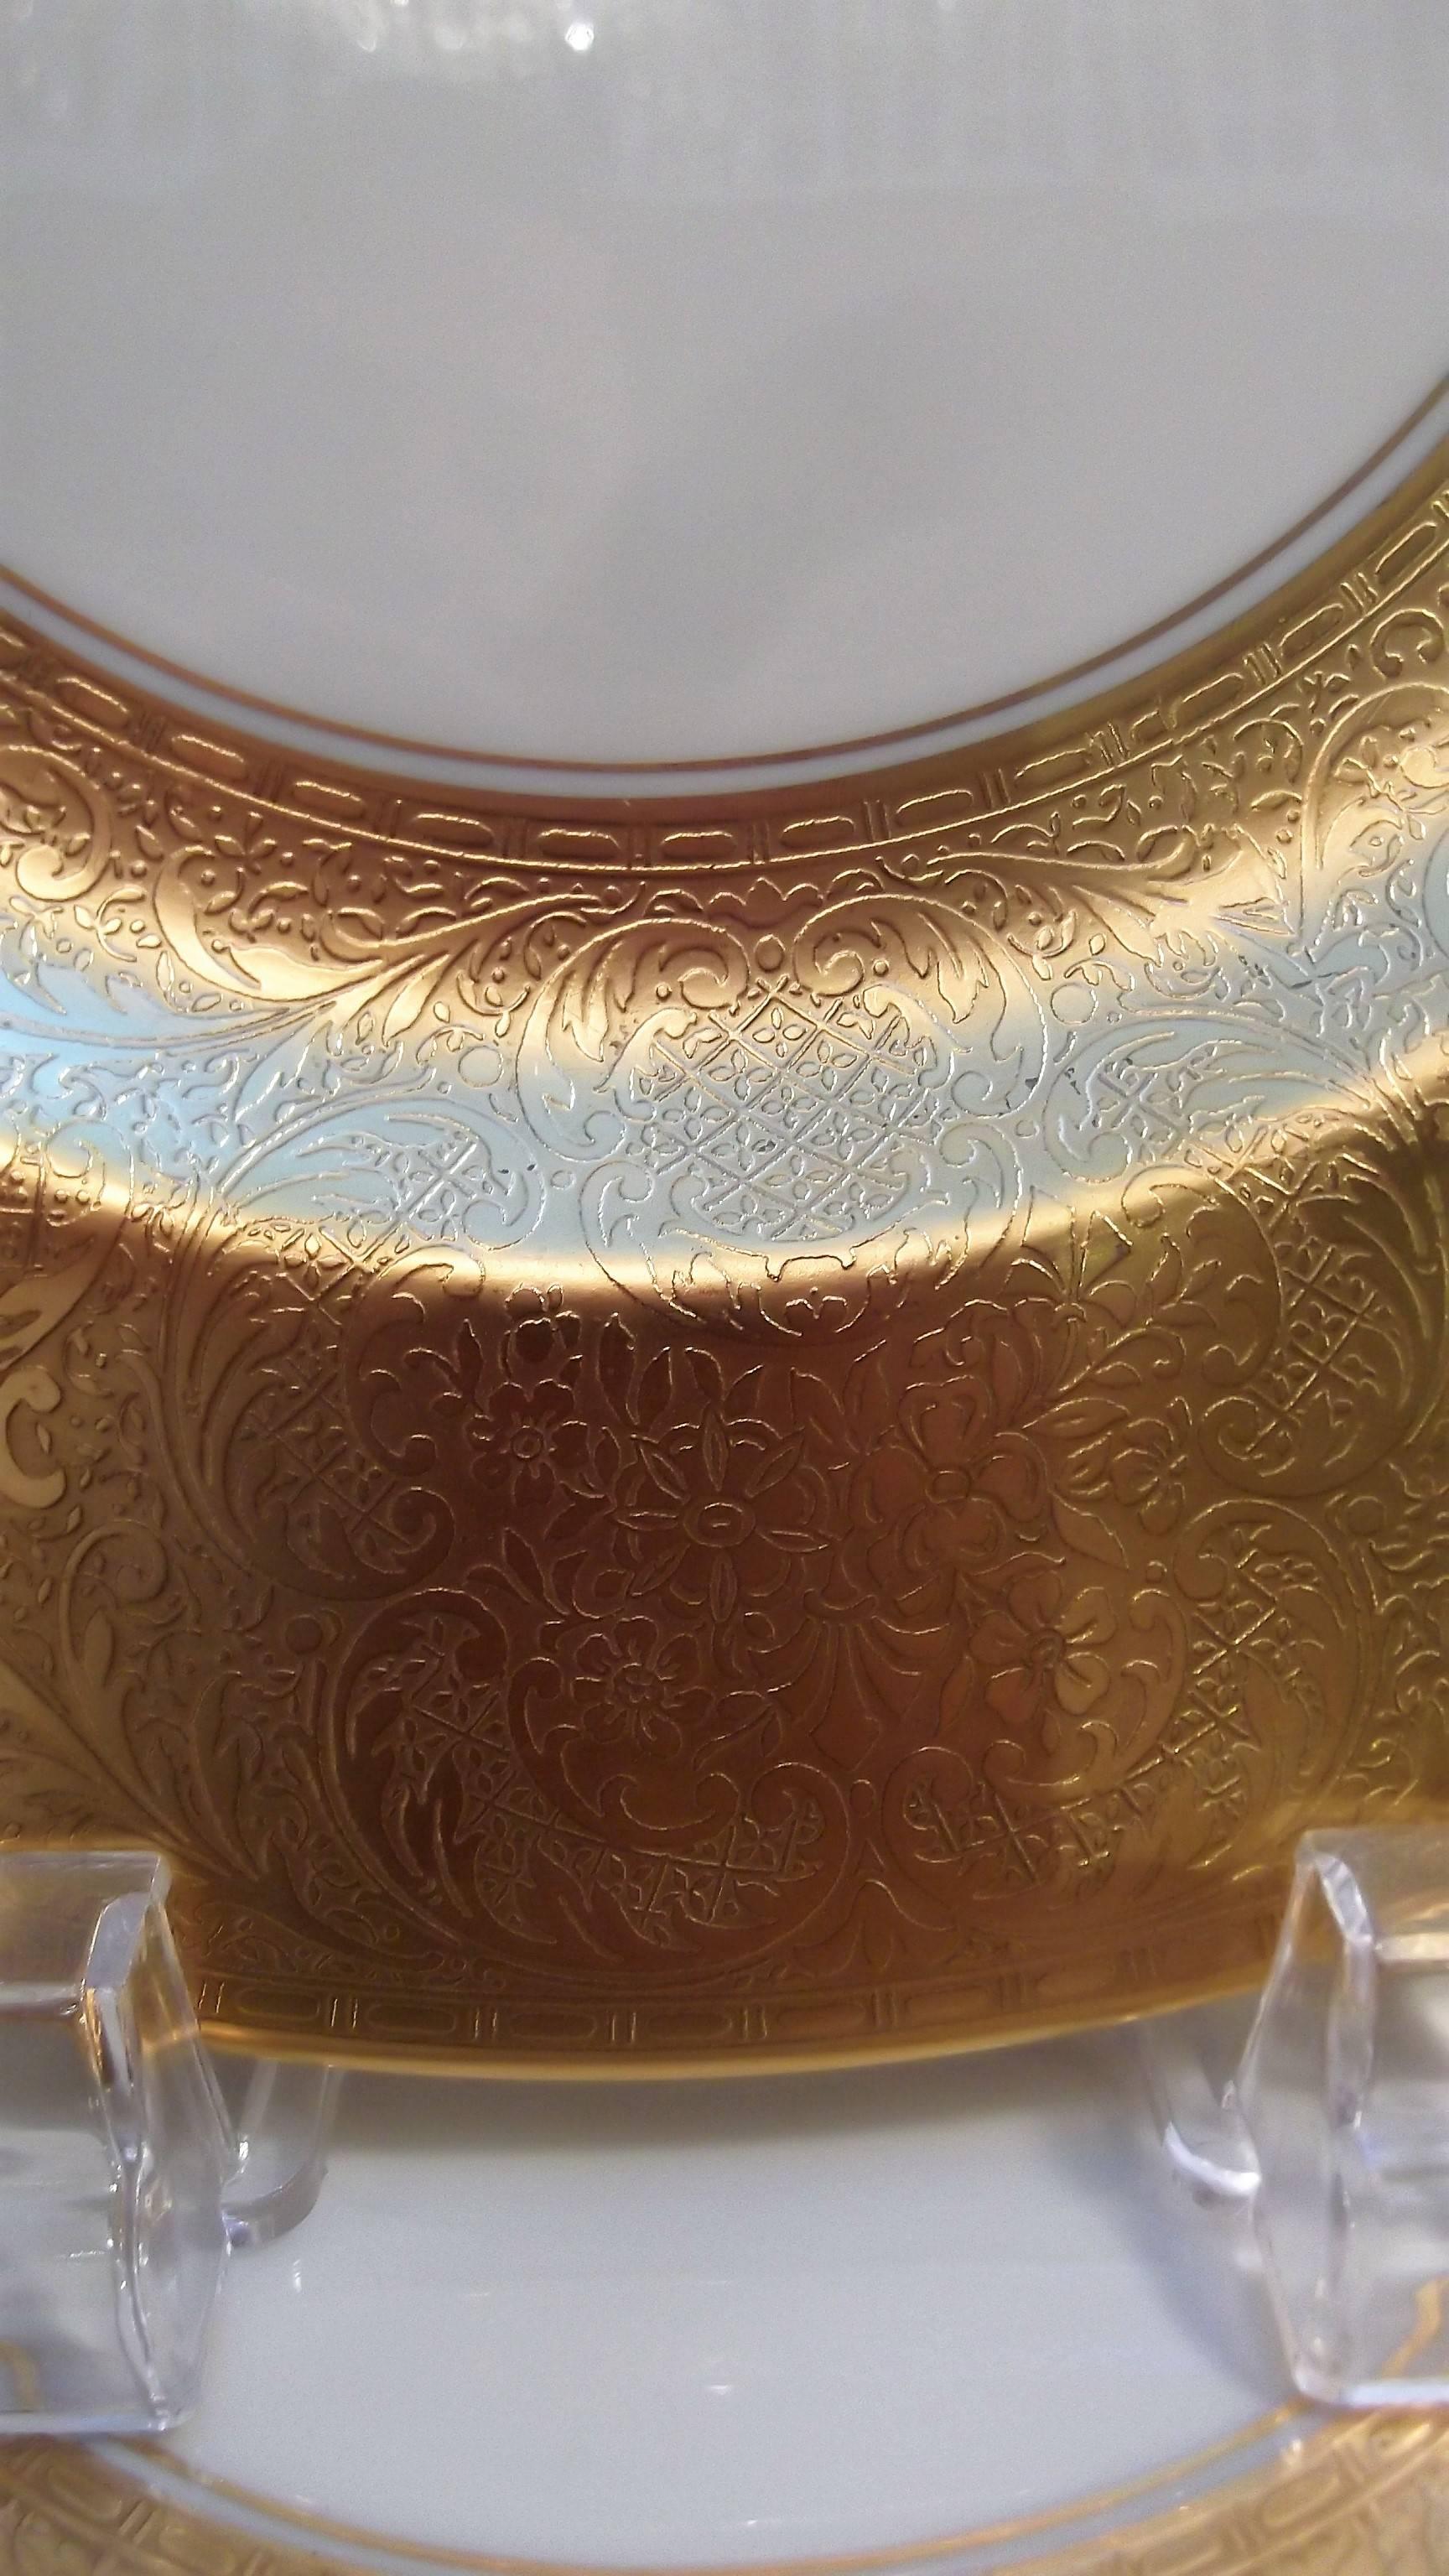 Gilt Set of 14 Gold Encrusted Service Plates by Pickard